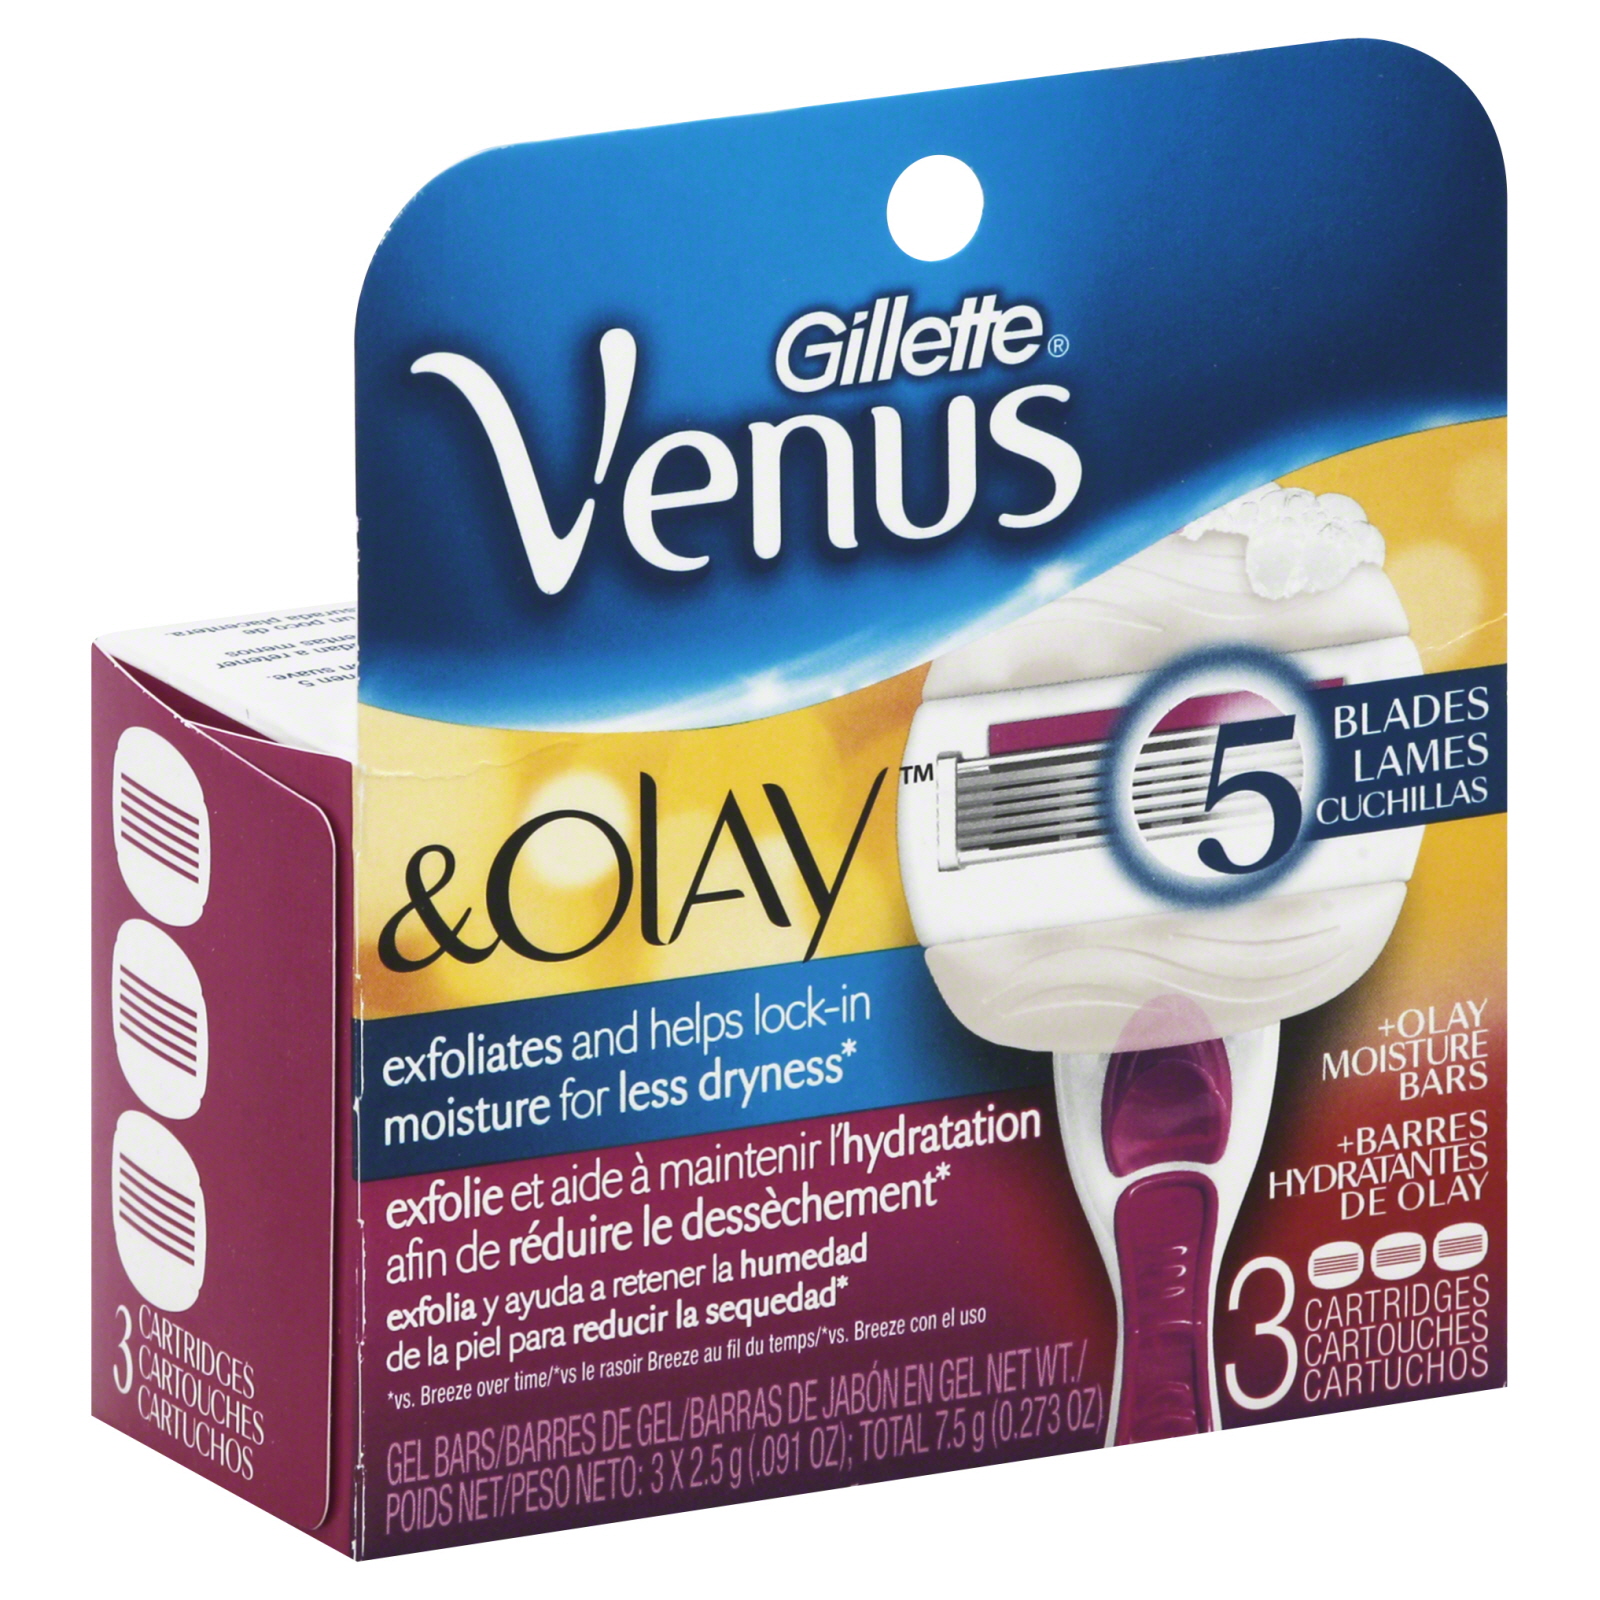 Gillette Venus & Olay Cartridges, Sugarberry Scent